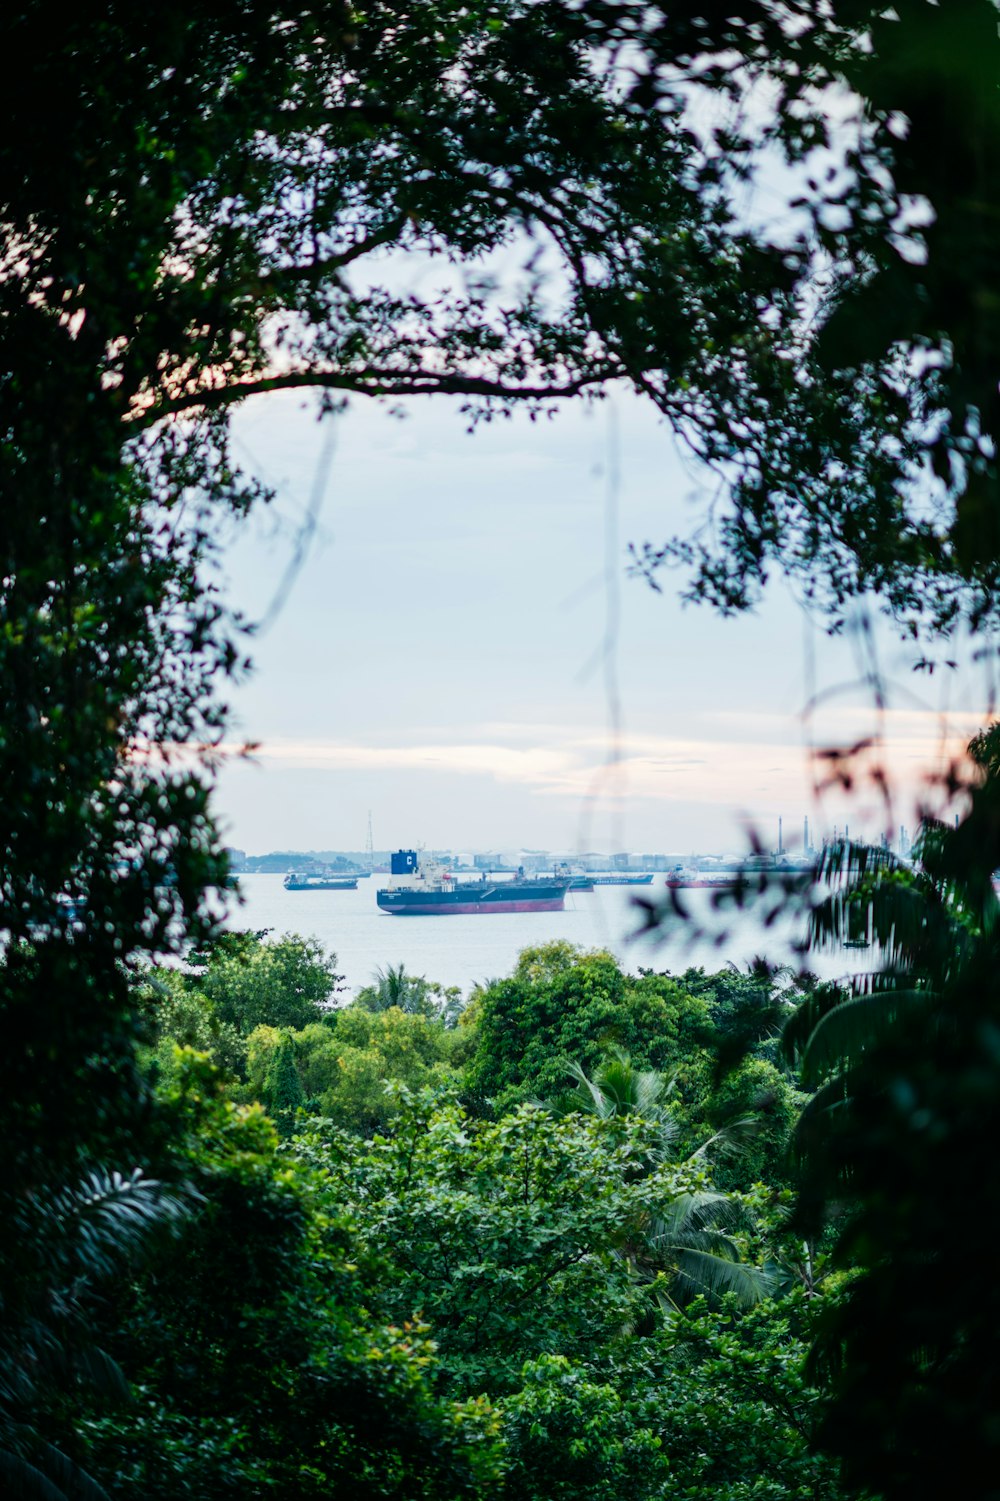 a large cargo ship is in the distance from a forested area